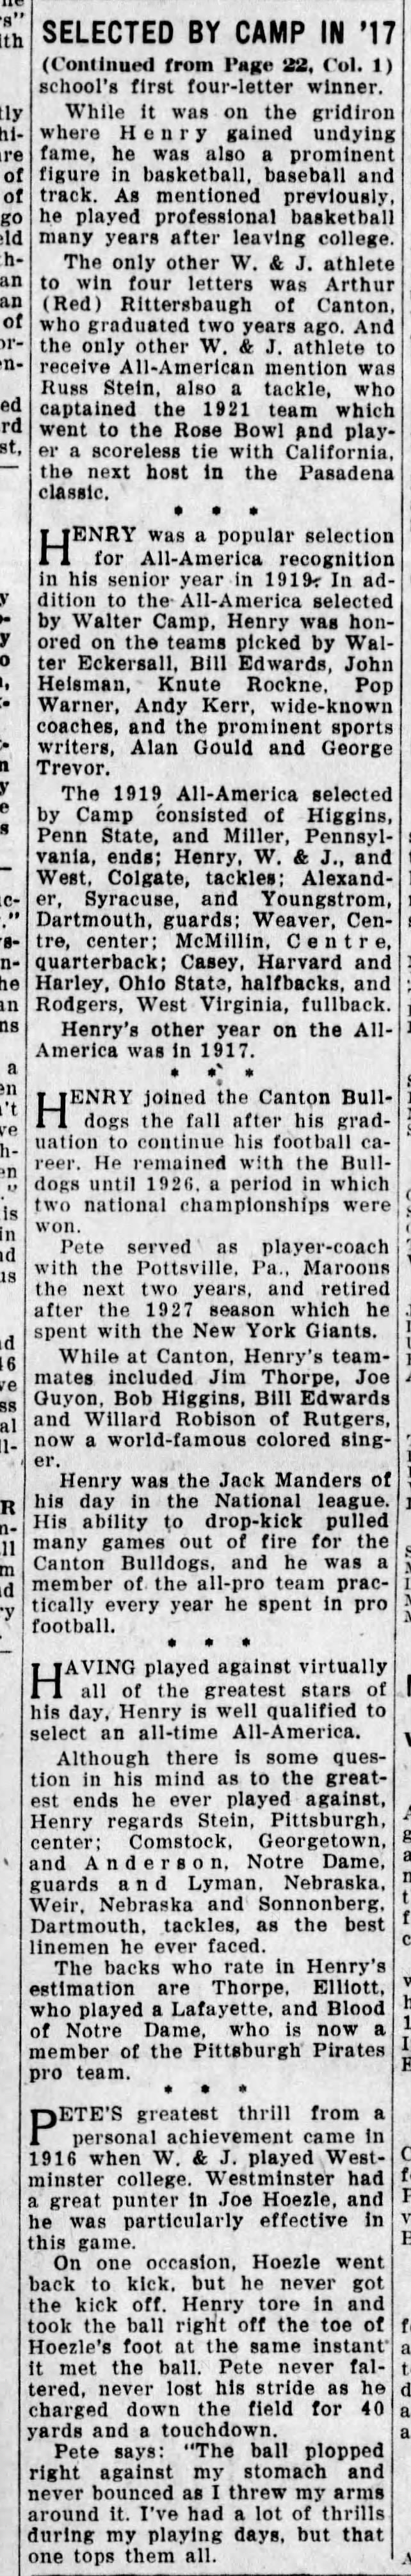 Selected By Camp In 1917, 19: Pete Henry Was First W-J Athlete Honored